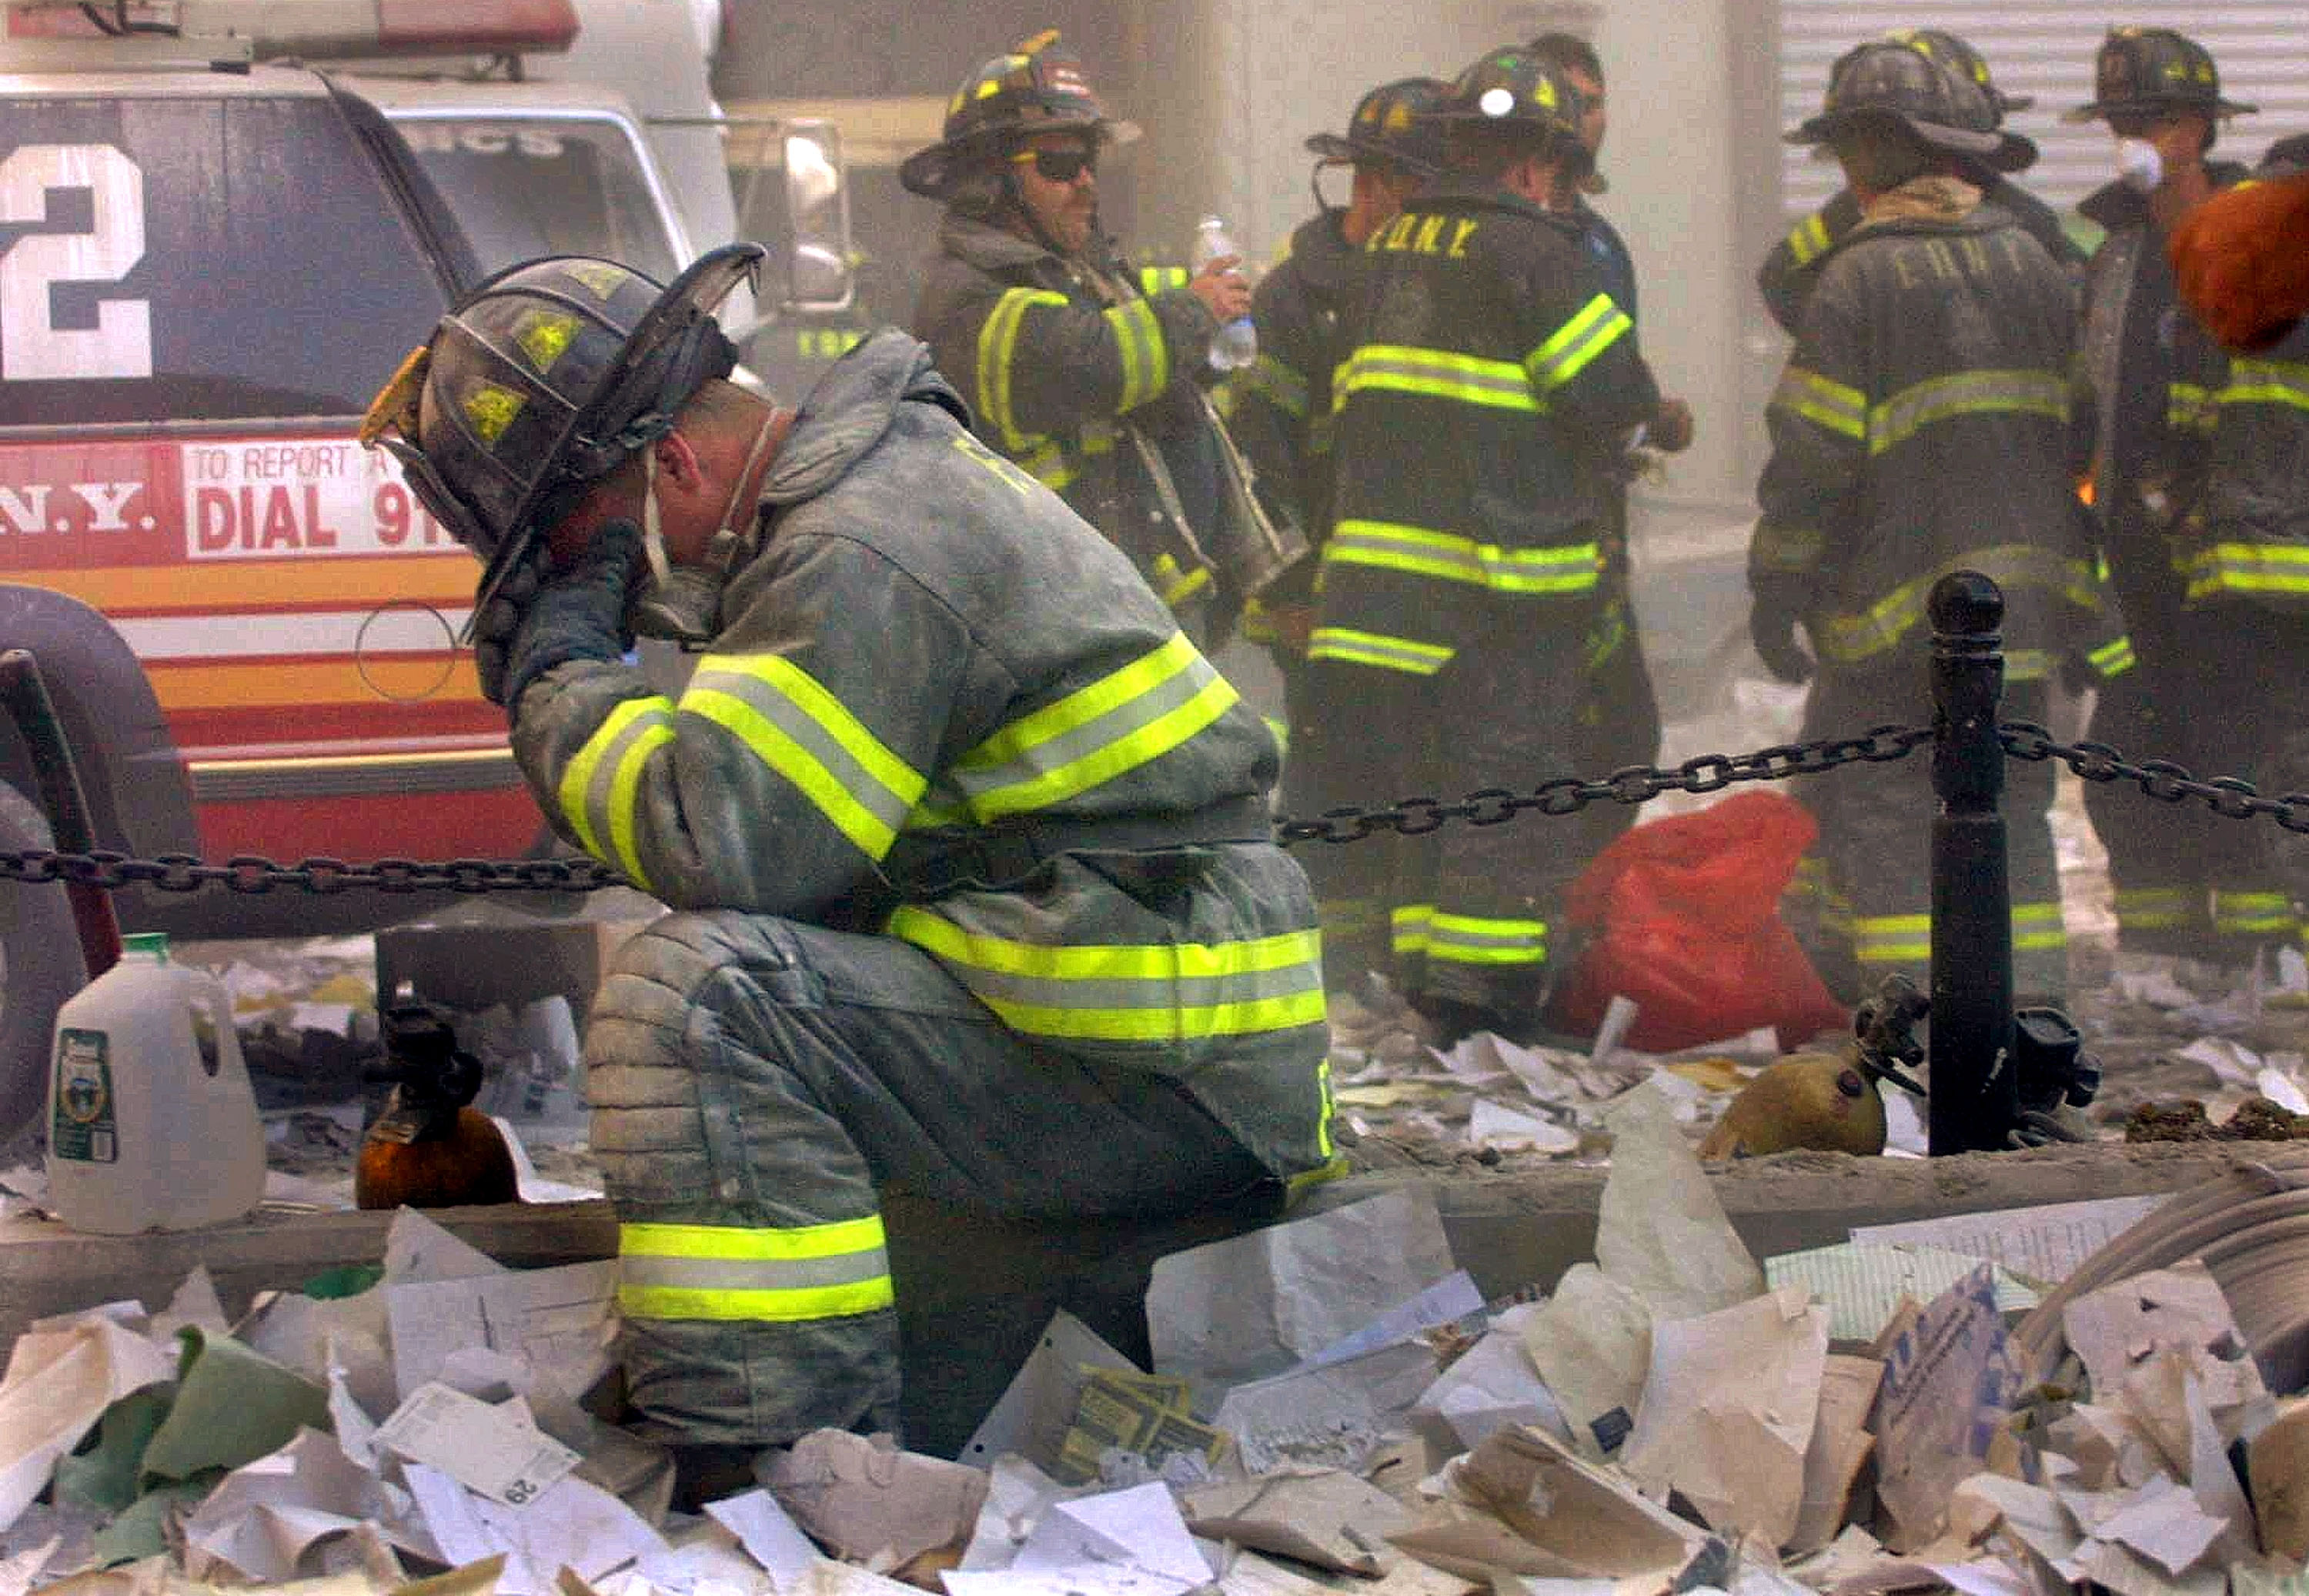 Firefighter Gerard McGibbon, of Engine 283 in Brownsville, Brooklyn, prays after the World Trade Center buildings collapsed September 11, 2001 | Source: Getty Images